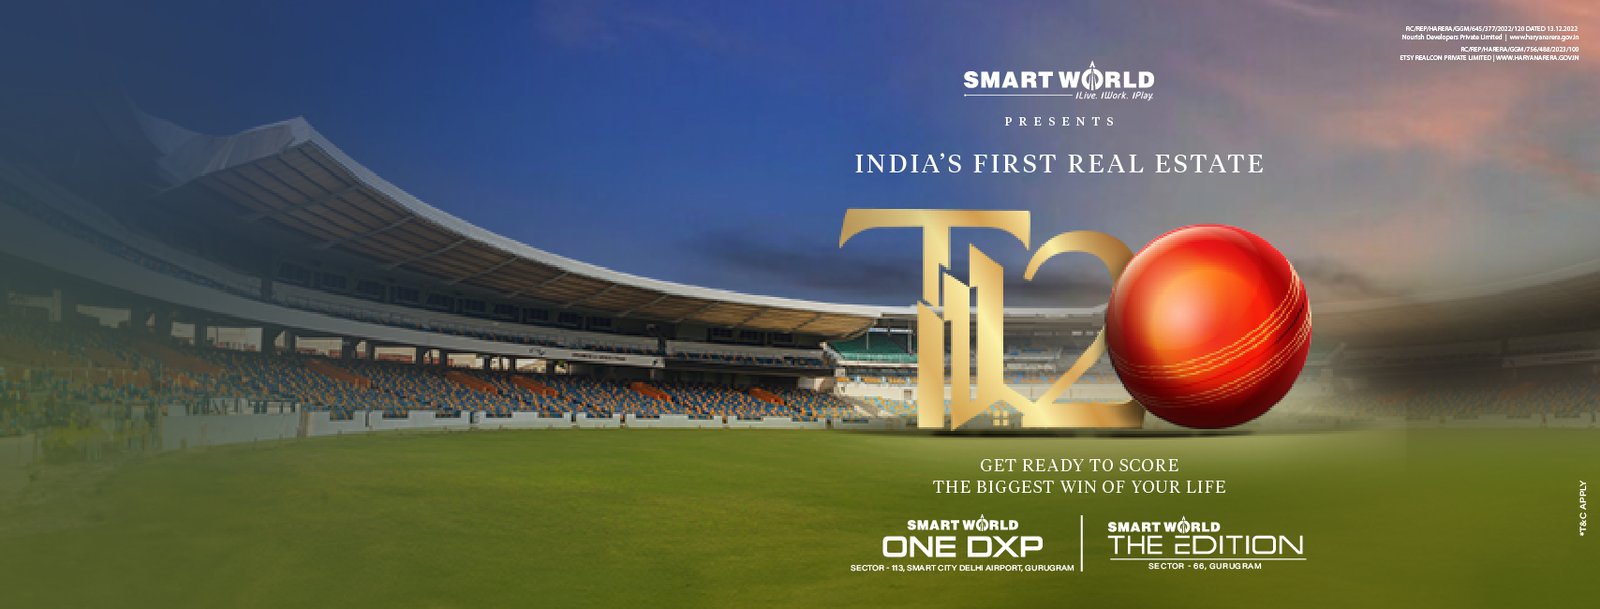 Experience Ultimate Luxury with Smart World T20 Offers – Irresistible Deals Await in Gurgaon!